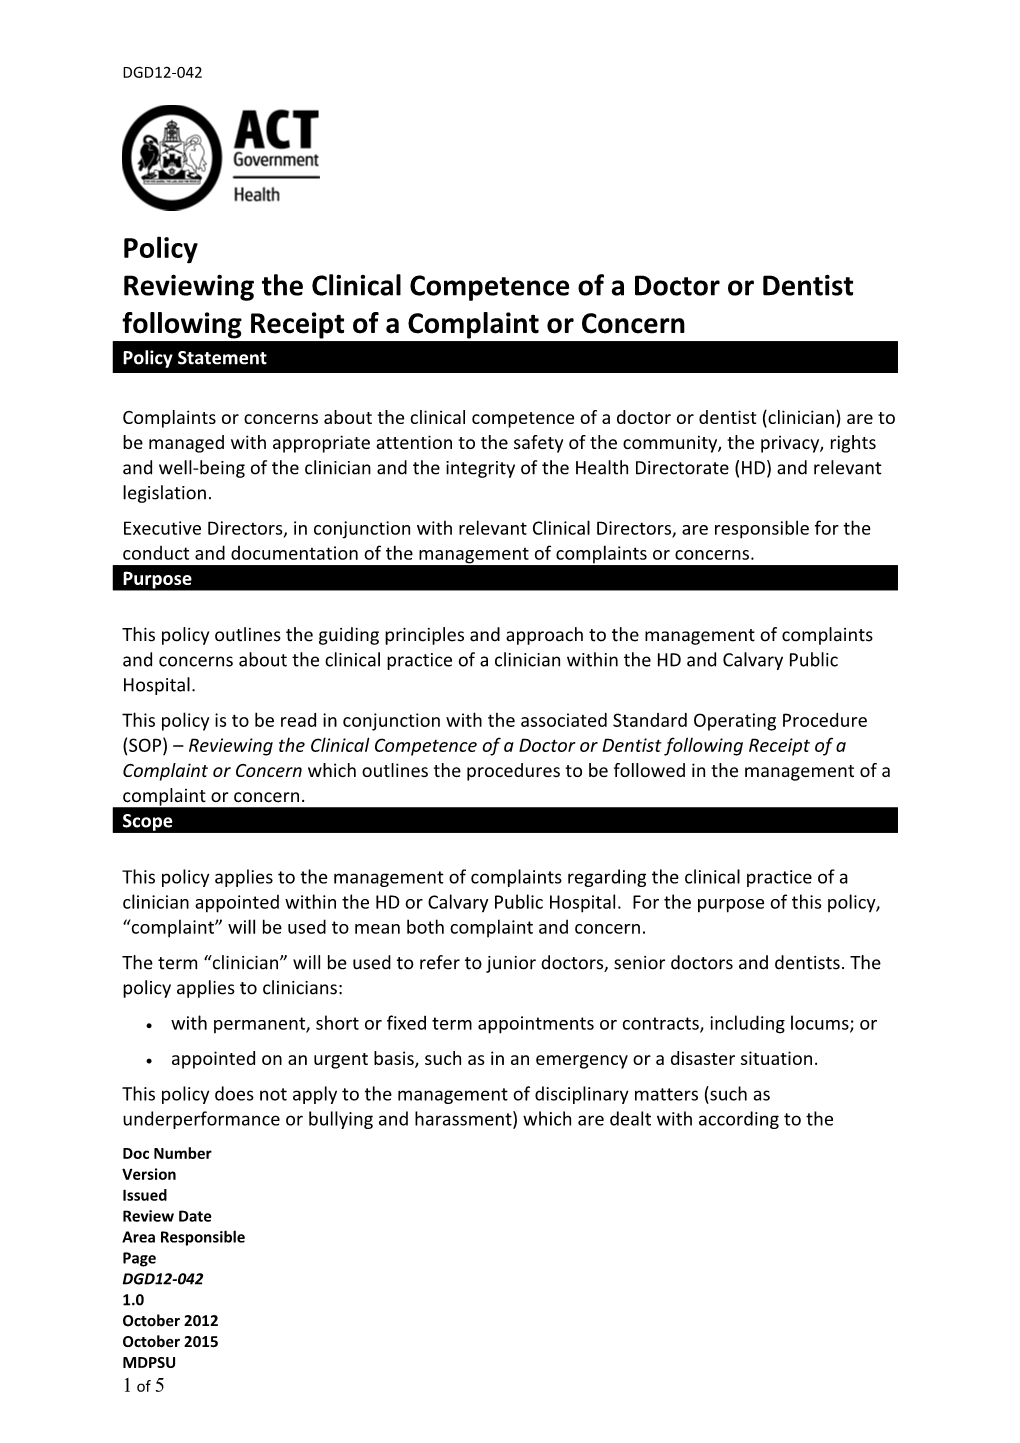 Reviewing the Clinical Competence of a Doctor Or Dentist Following Receipt of a Complaint